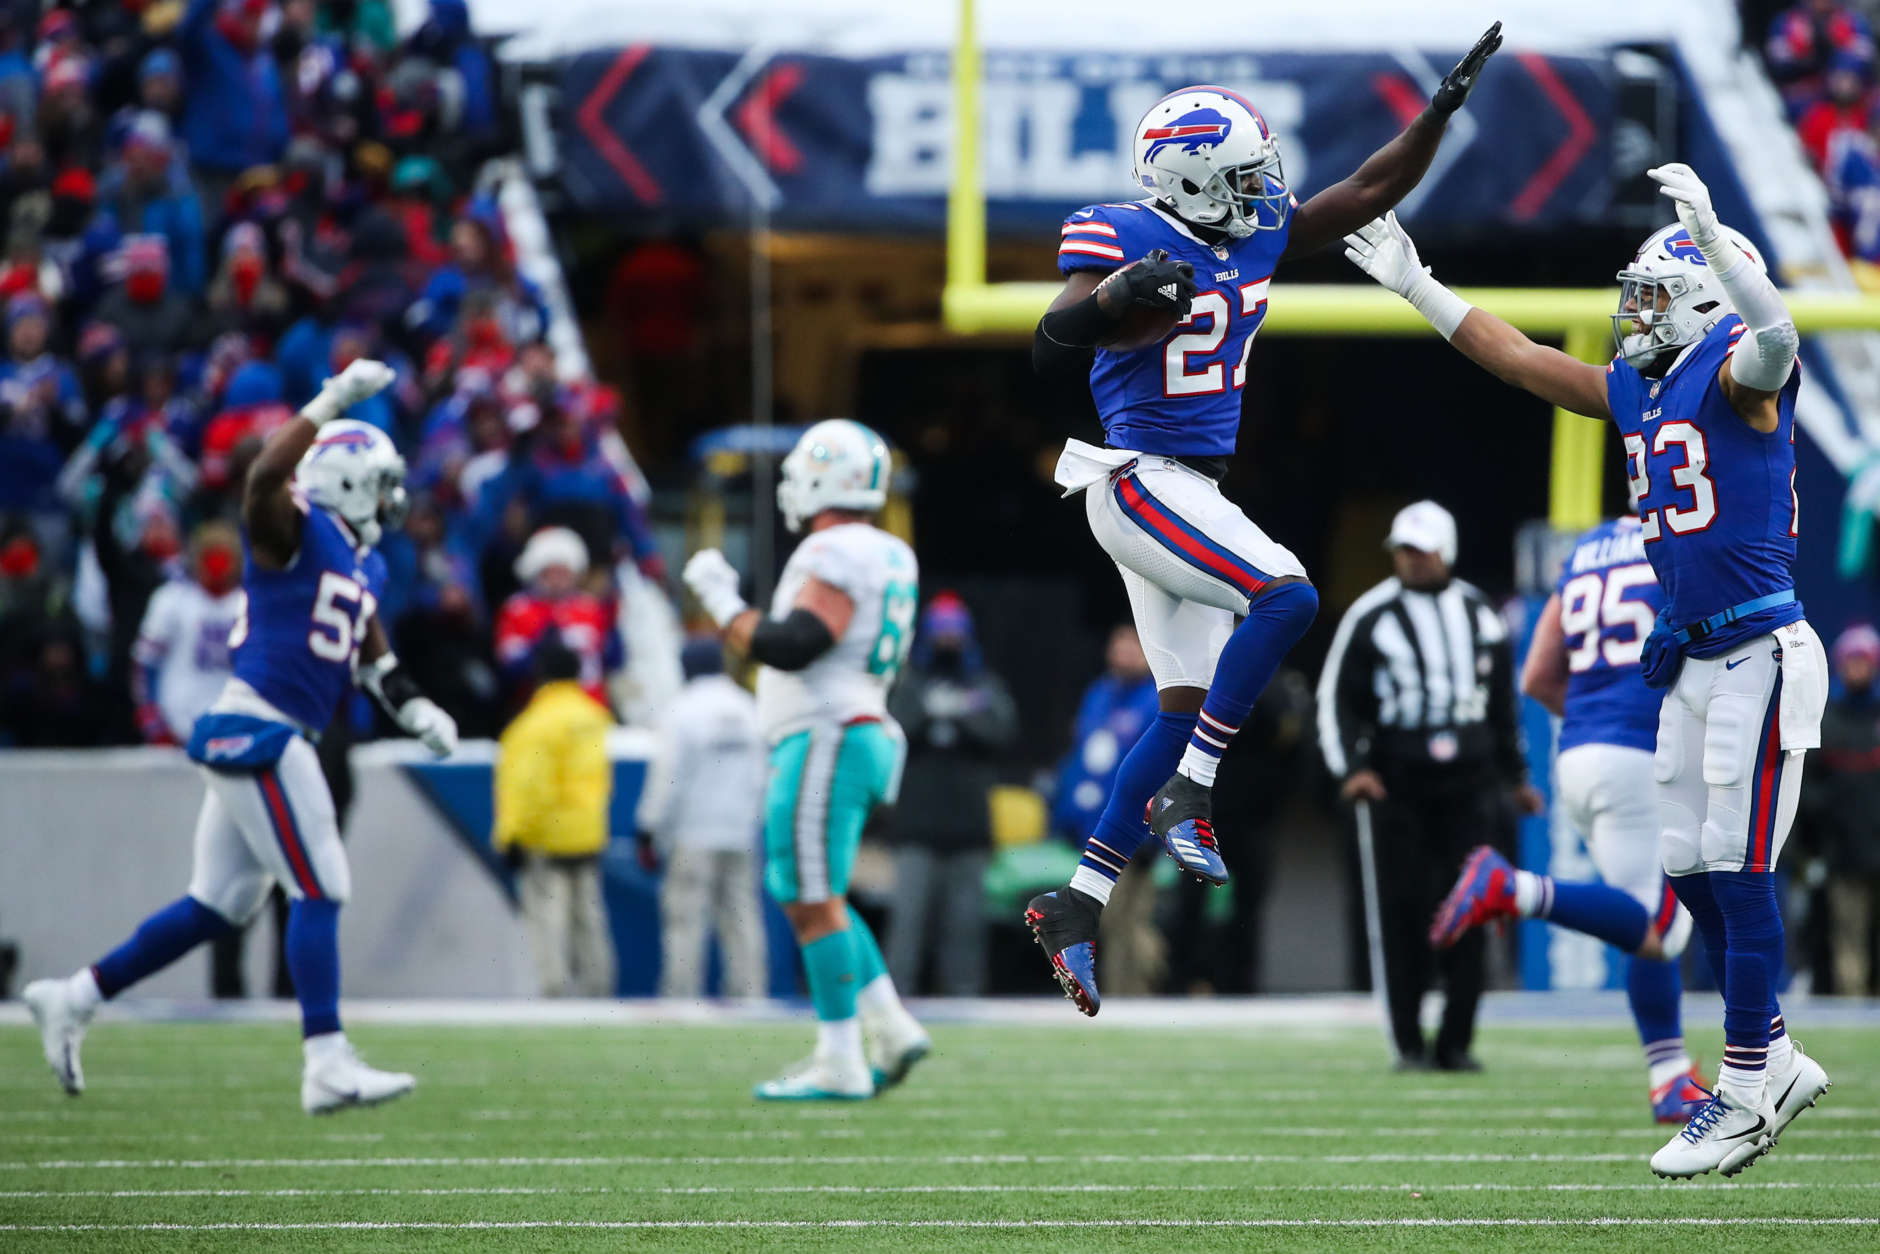 ORCHARD PARK, NY - DECEMBER 17:  Tre'Davious White #27 of the Buffalo Bills celebrates after intercepting the ball during the fourth quarter to win the game against the Miami Dolphins on December 17, 2017 at New Era Field in Orchard Park, New York.  (Photo by Tom Szczerbowski/Getty Images)